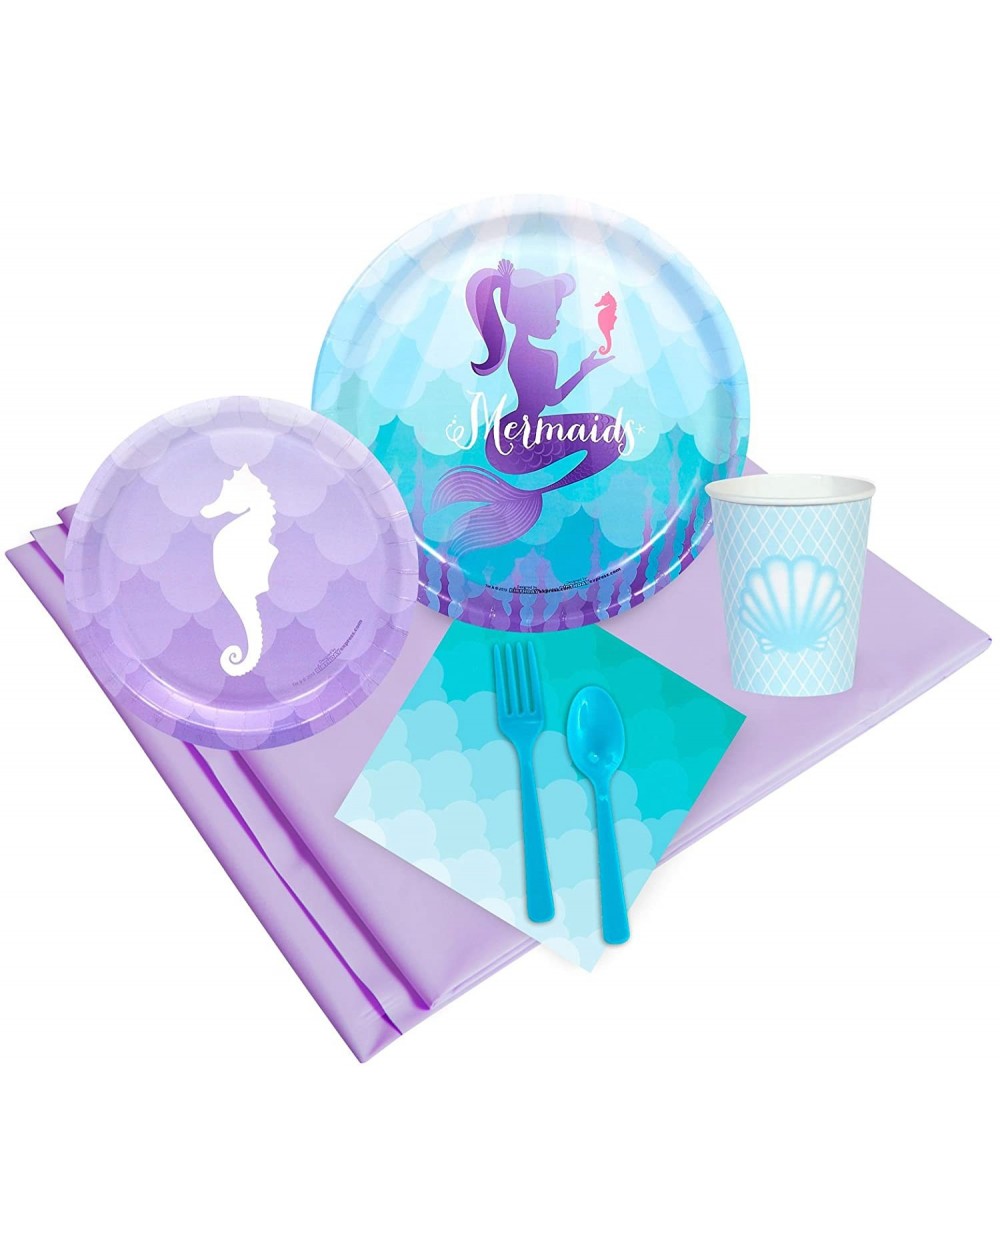 Party Packs Mermaids Under The Sea Party Supplies - Party Pack for 32 - CD12BC1I9WN $45.54